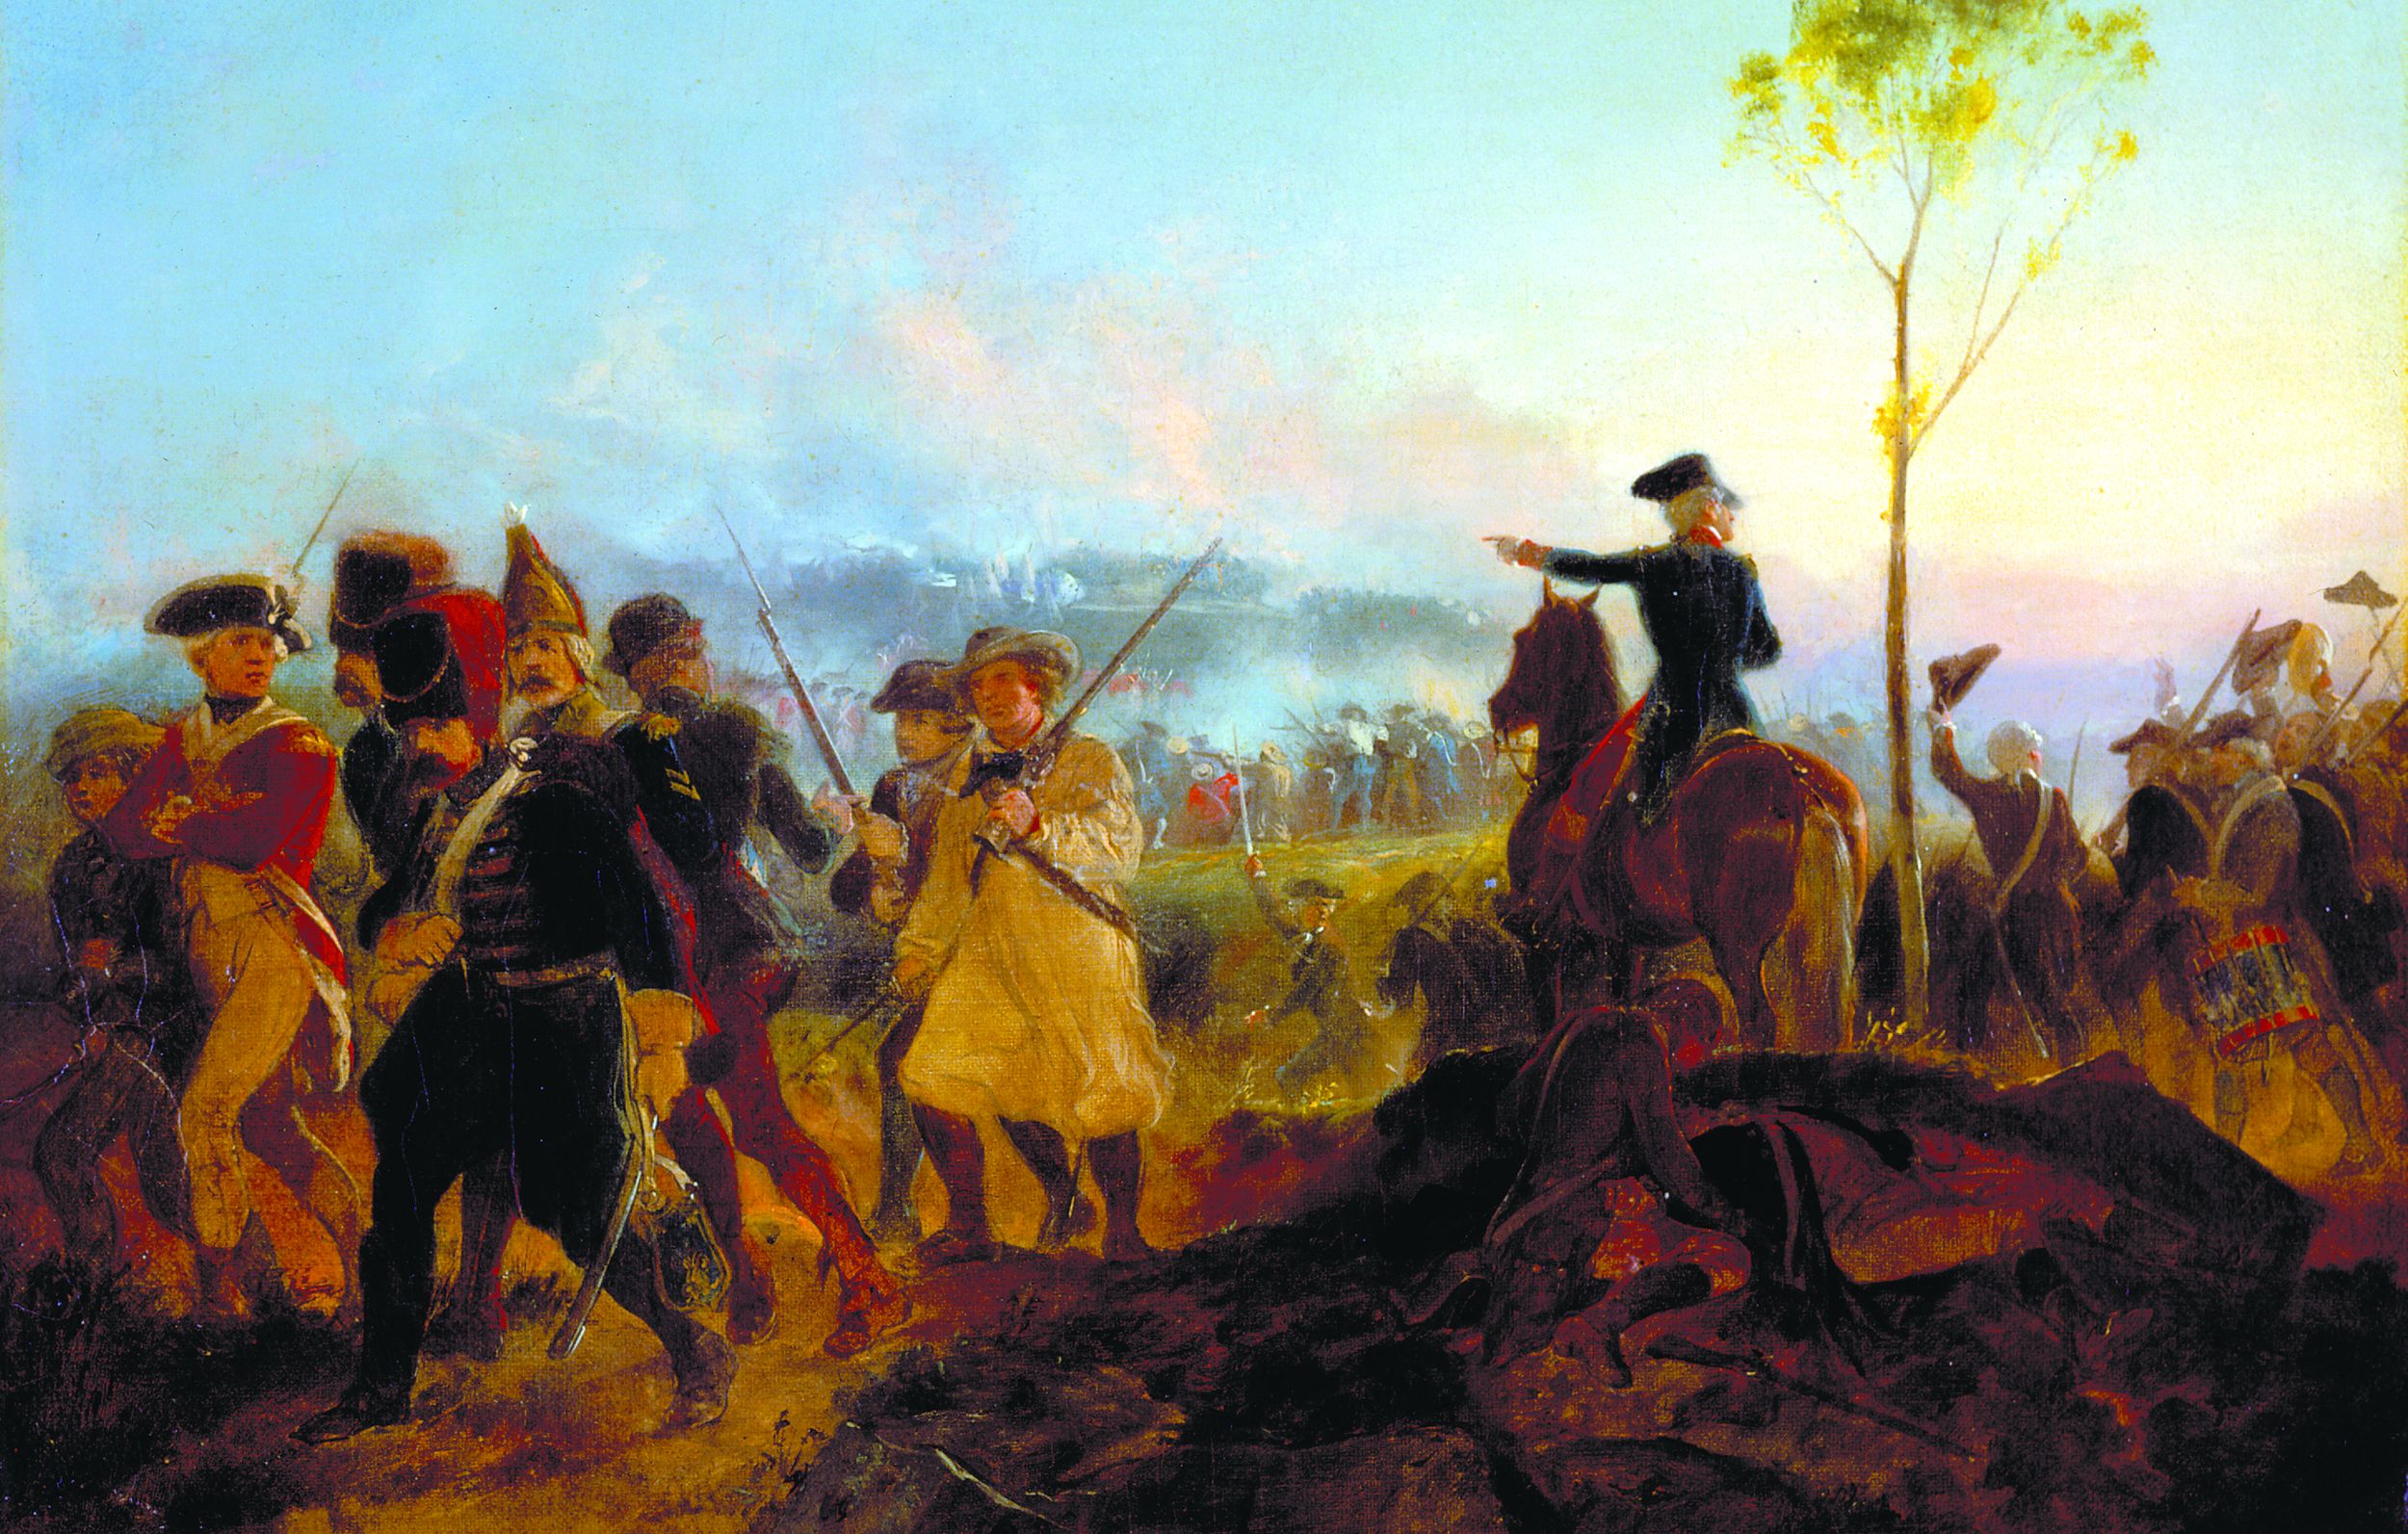 Brigadier General John Stark directs victorious American forces at the Battle of Bennington in August 1777.